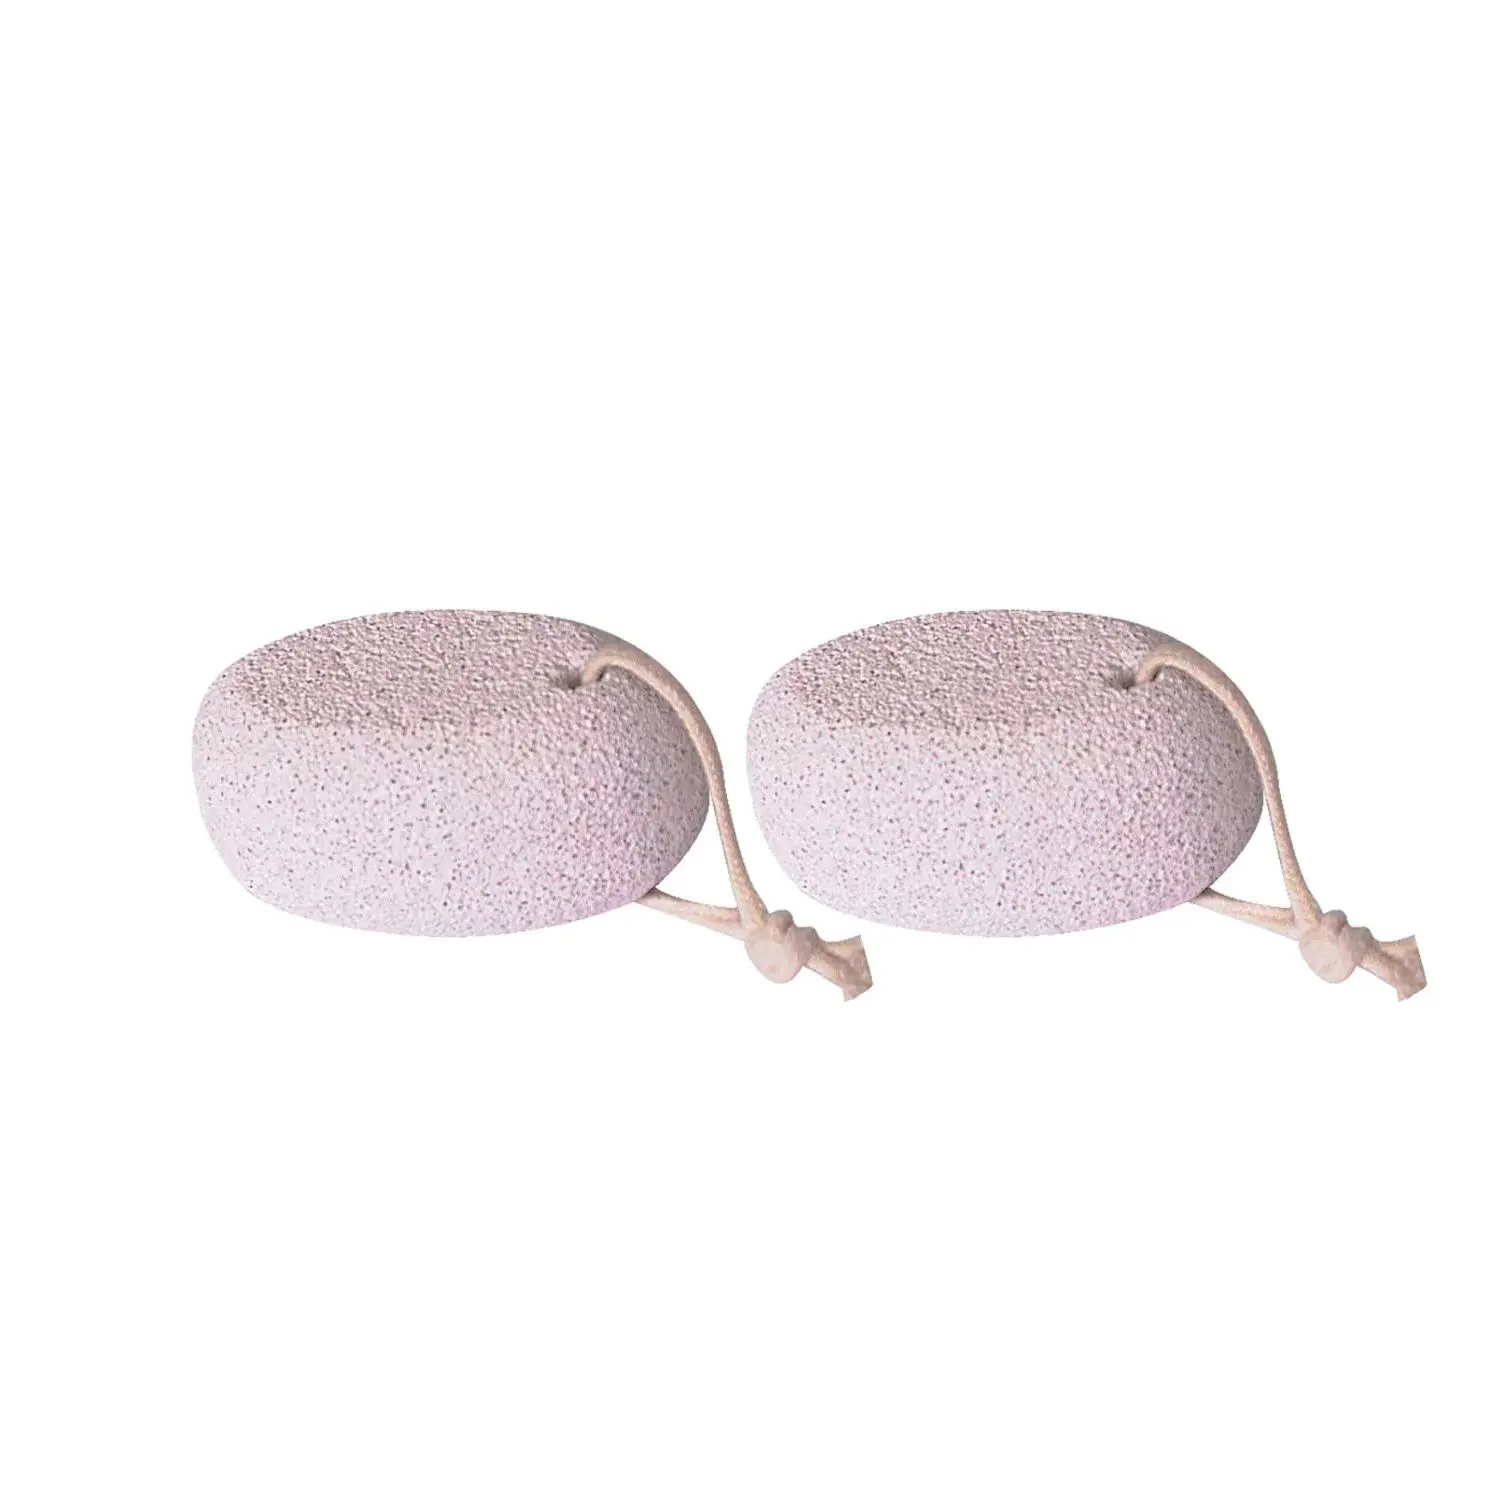 Bronson Professional Pumice stone (color may vary) Pack of 2